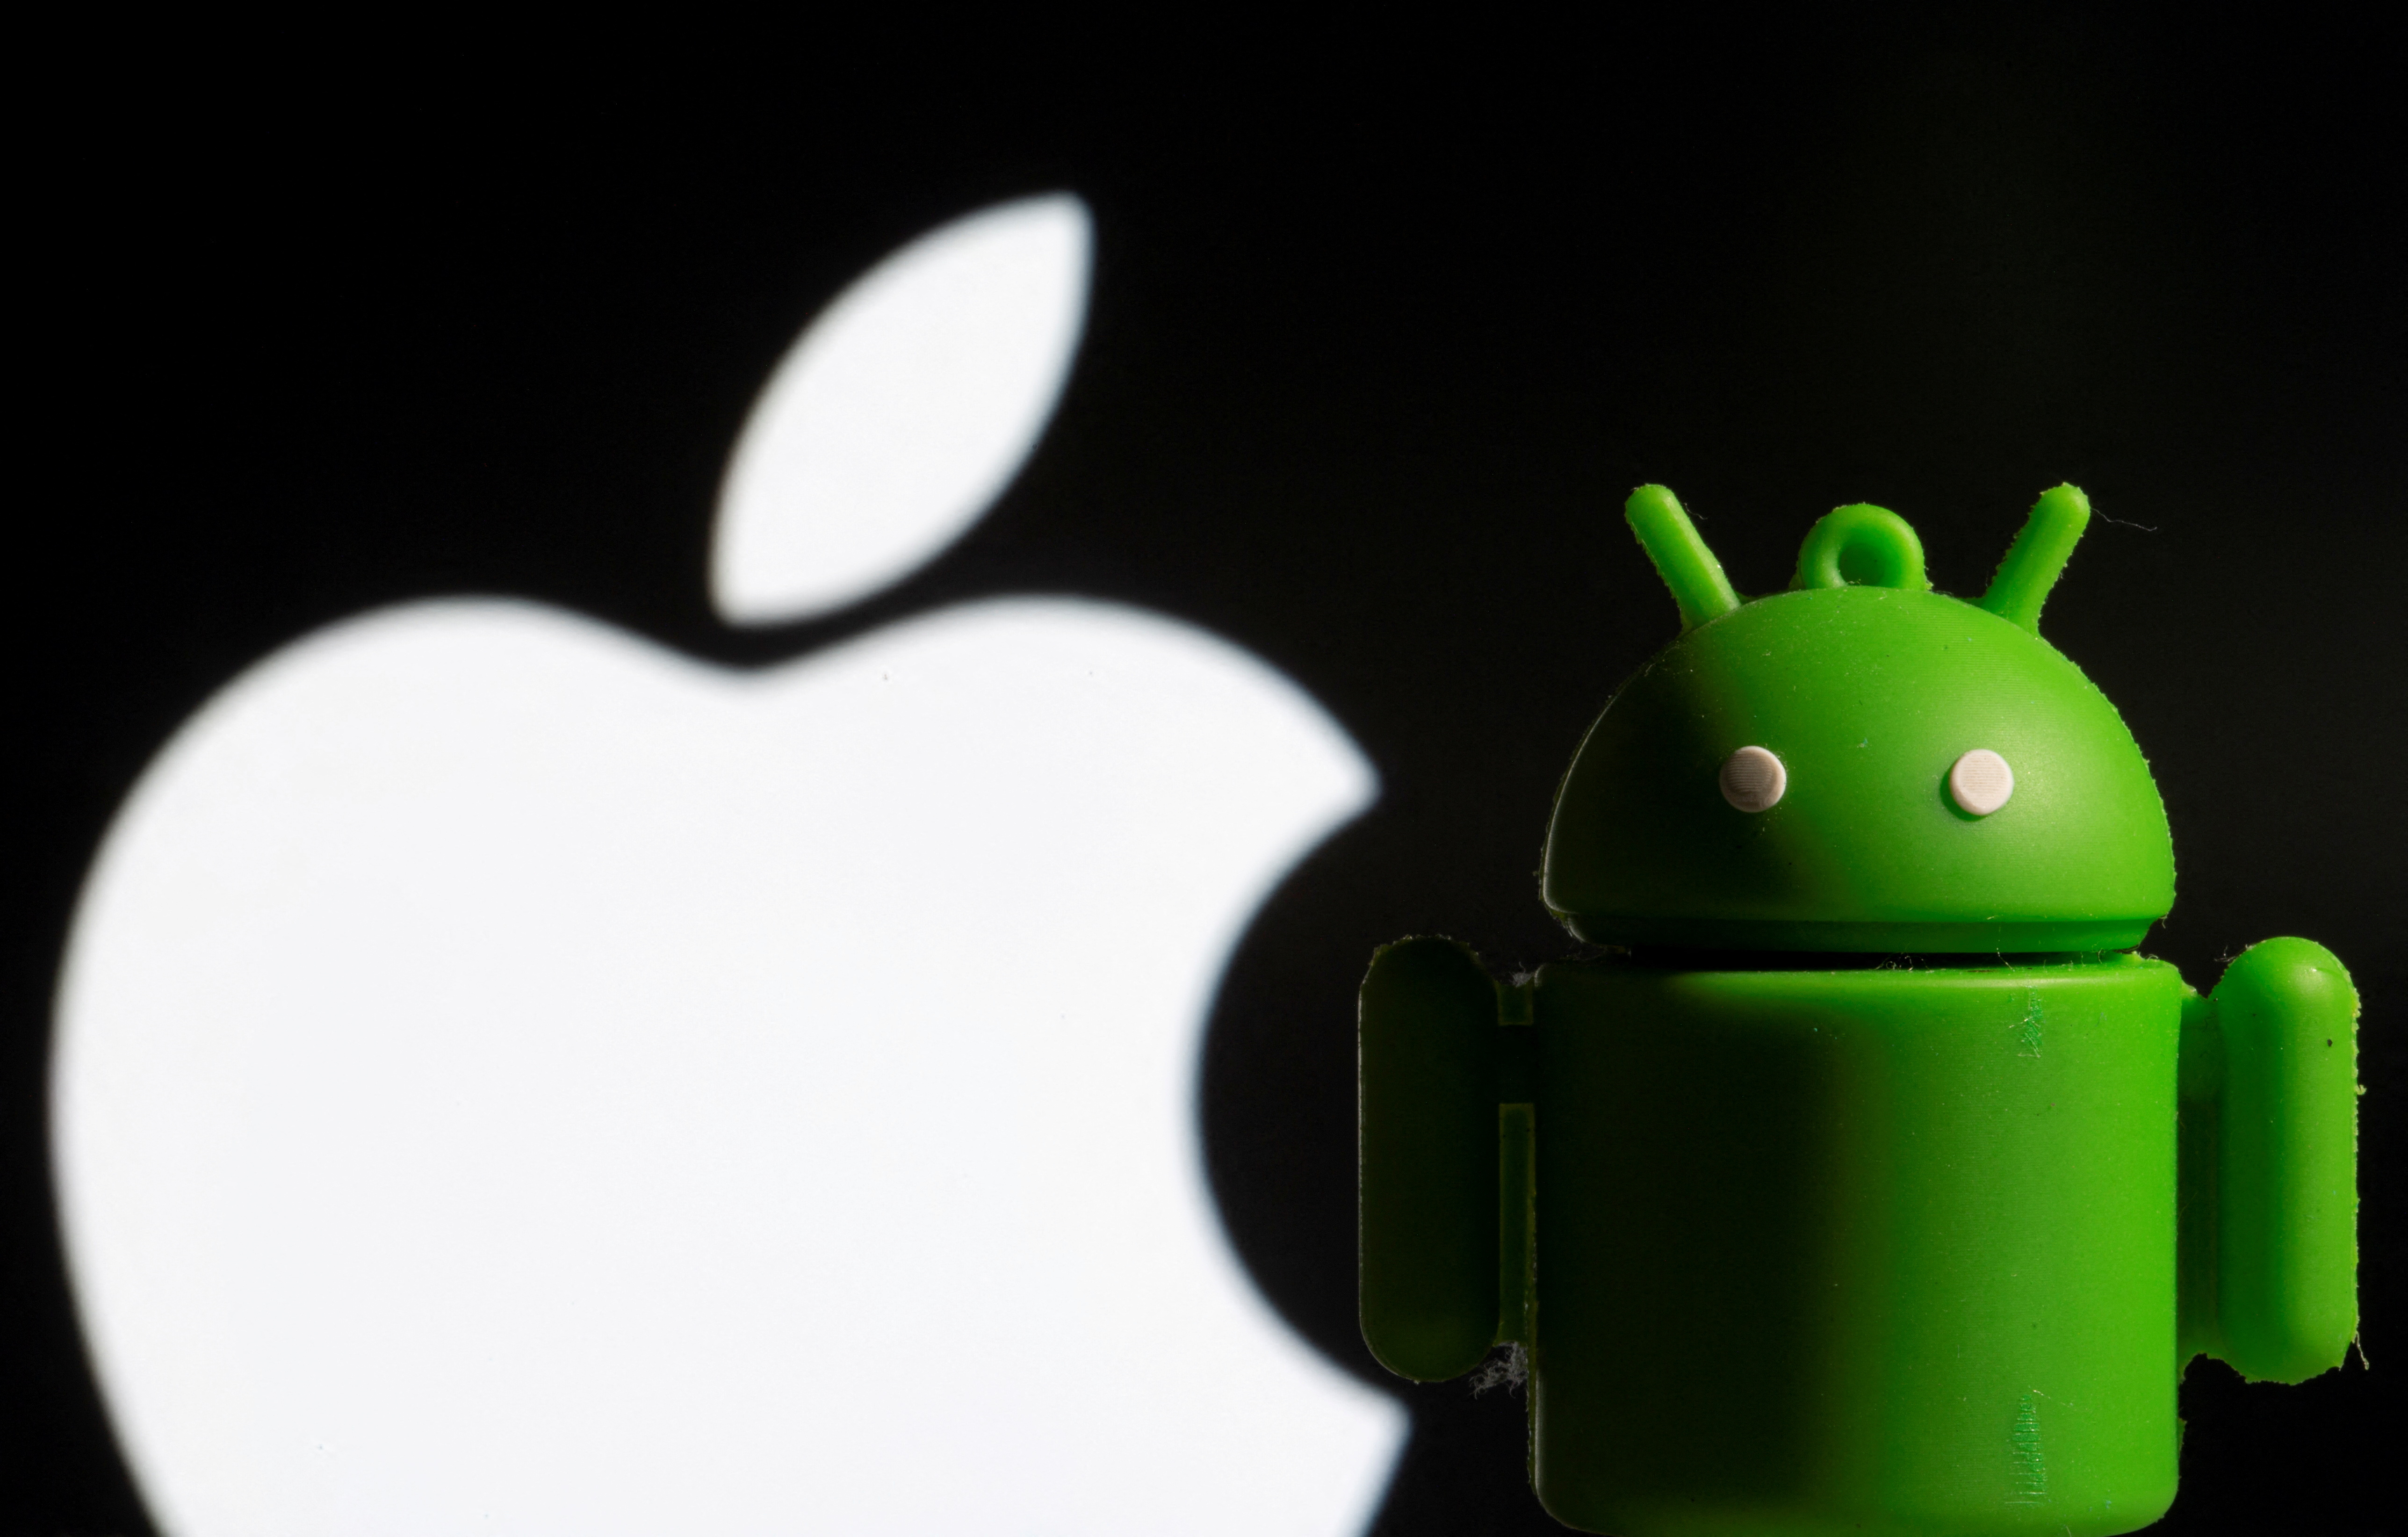 FILE PHOTO: A 3D printed Android mascot Bugdroid is seen in front of the Apple logo in this illustration taken November 3, 2021. REUTERS/Dado Ruvic/Illustration/File Photo